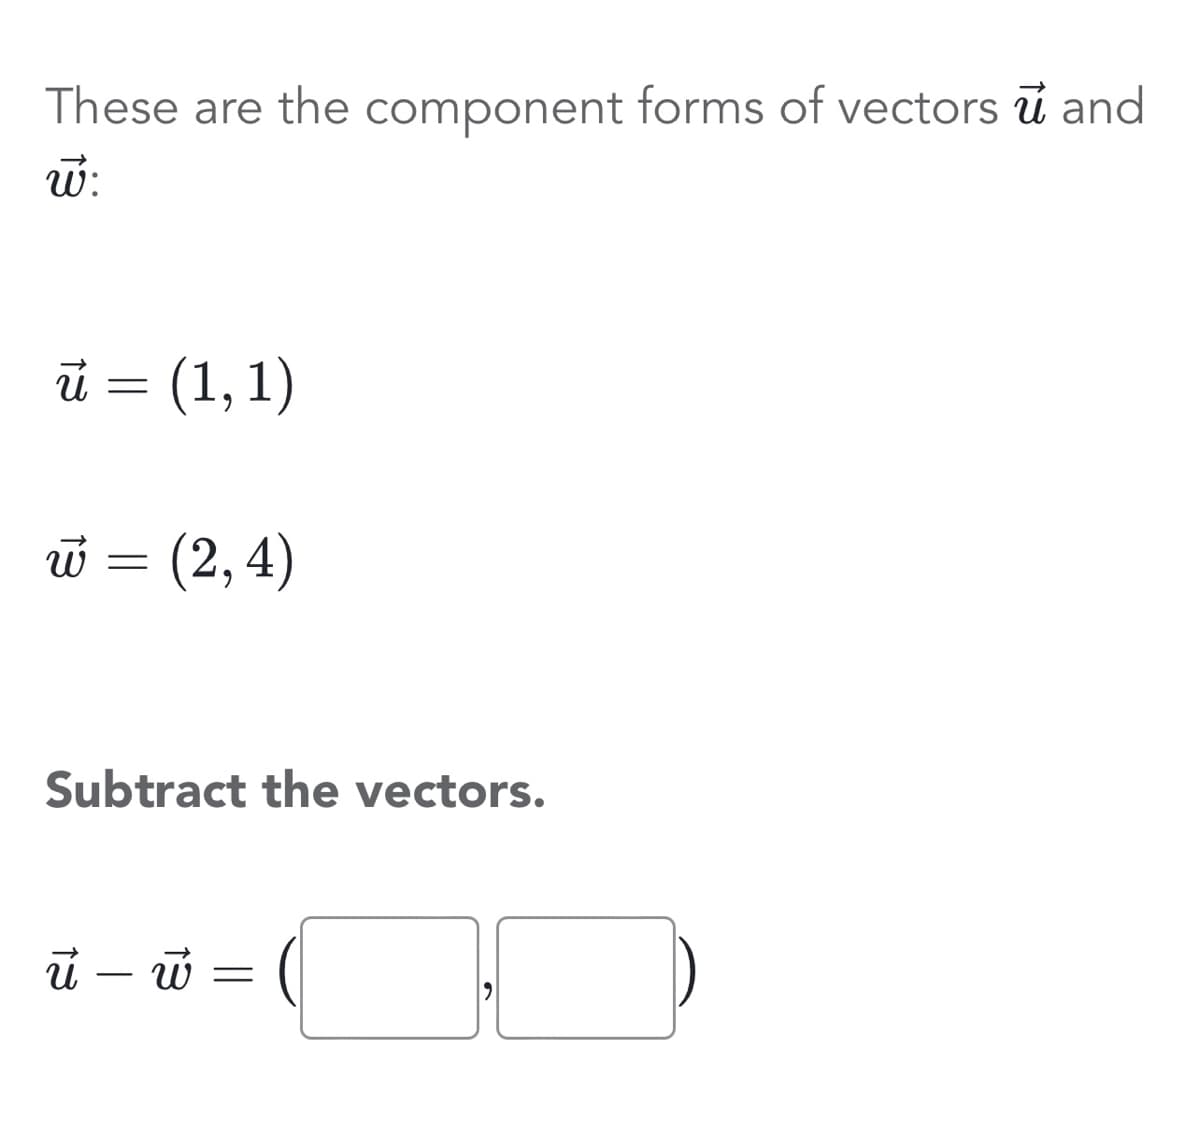 These are the component forms of vectors u and
w:
ū u = (1, 1)
w = (2,4)
Subtract the vectors.
ū - w =
][